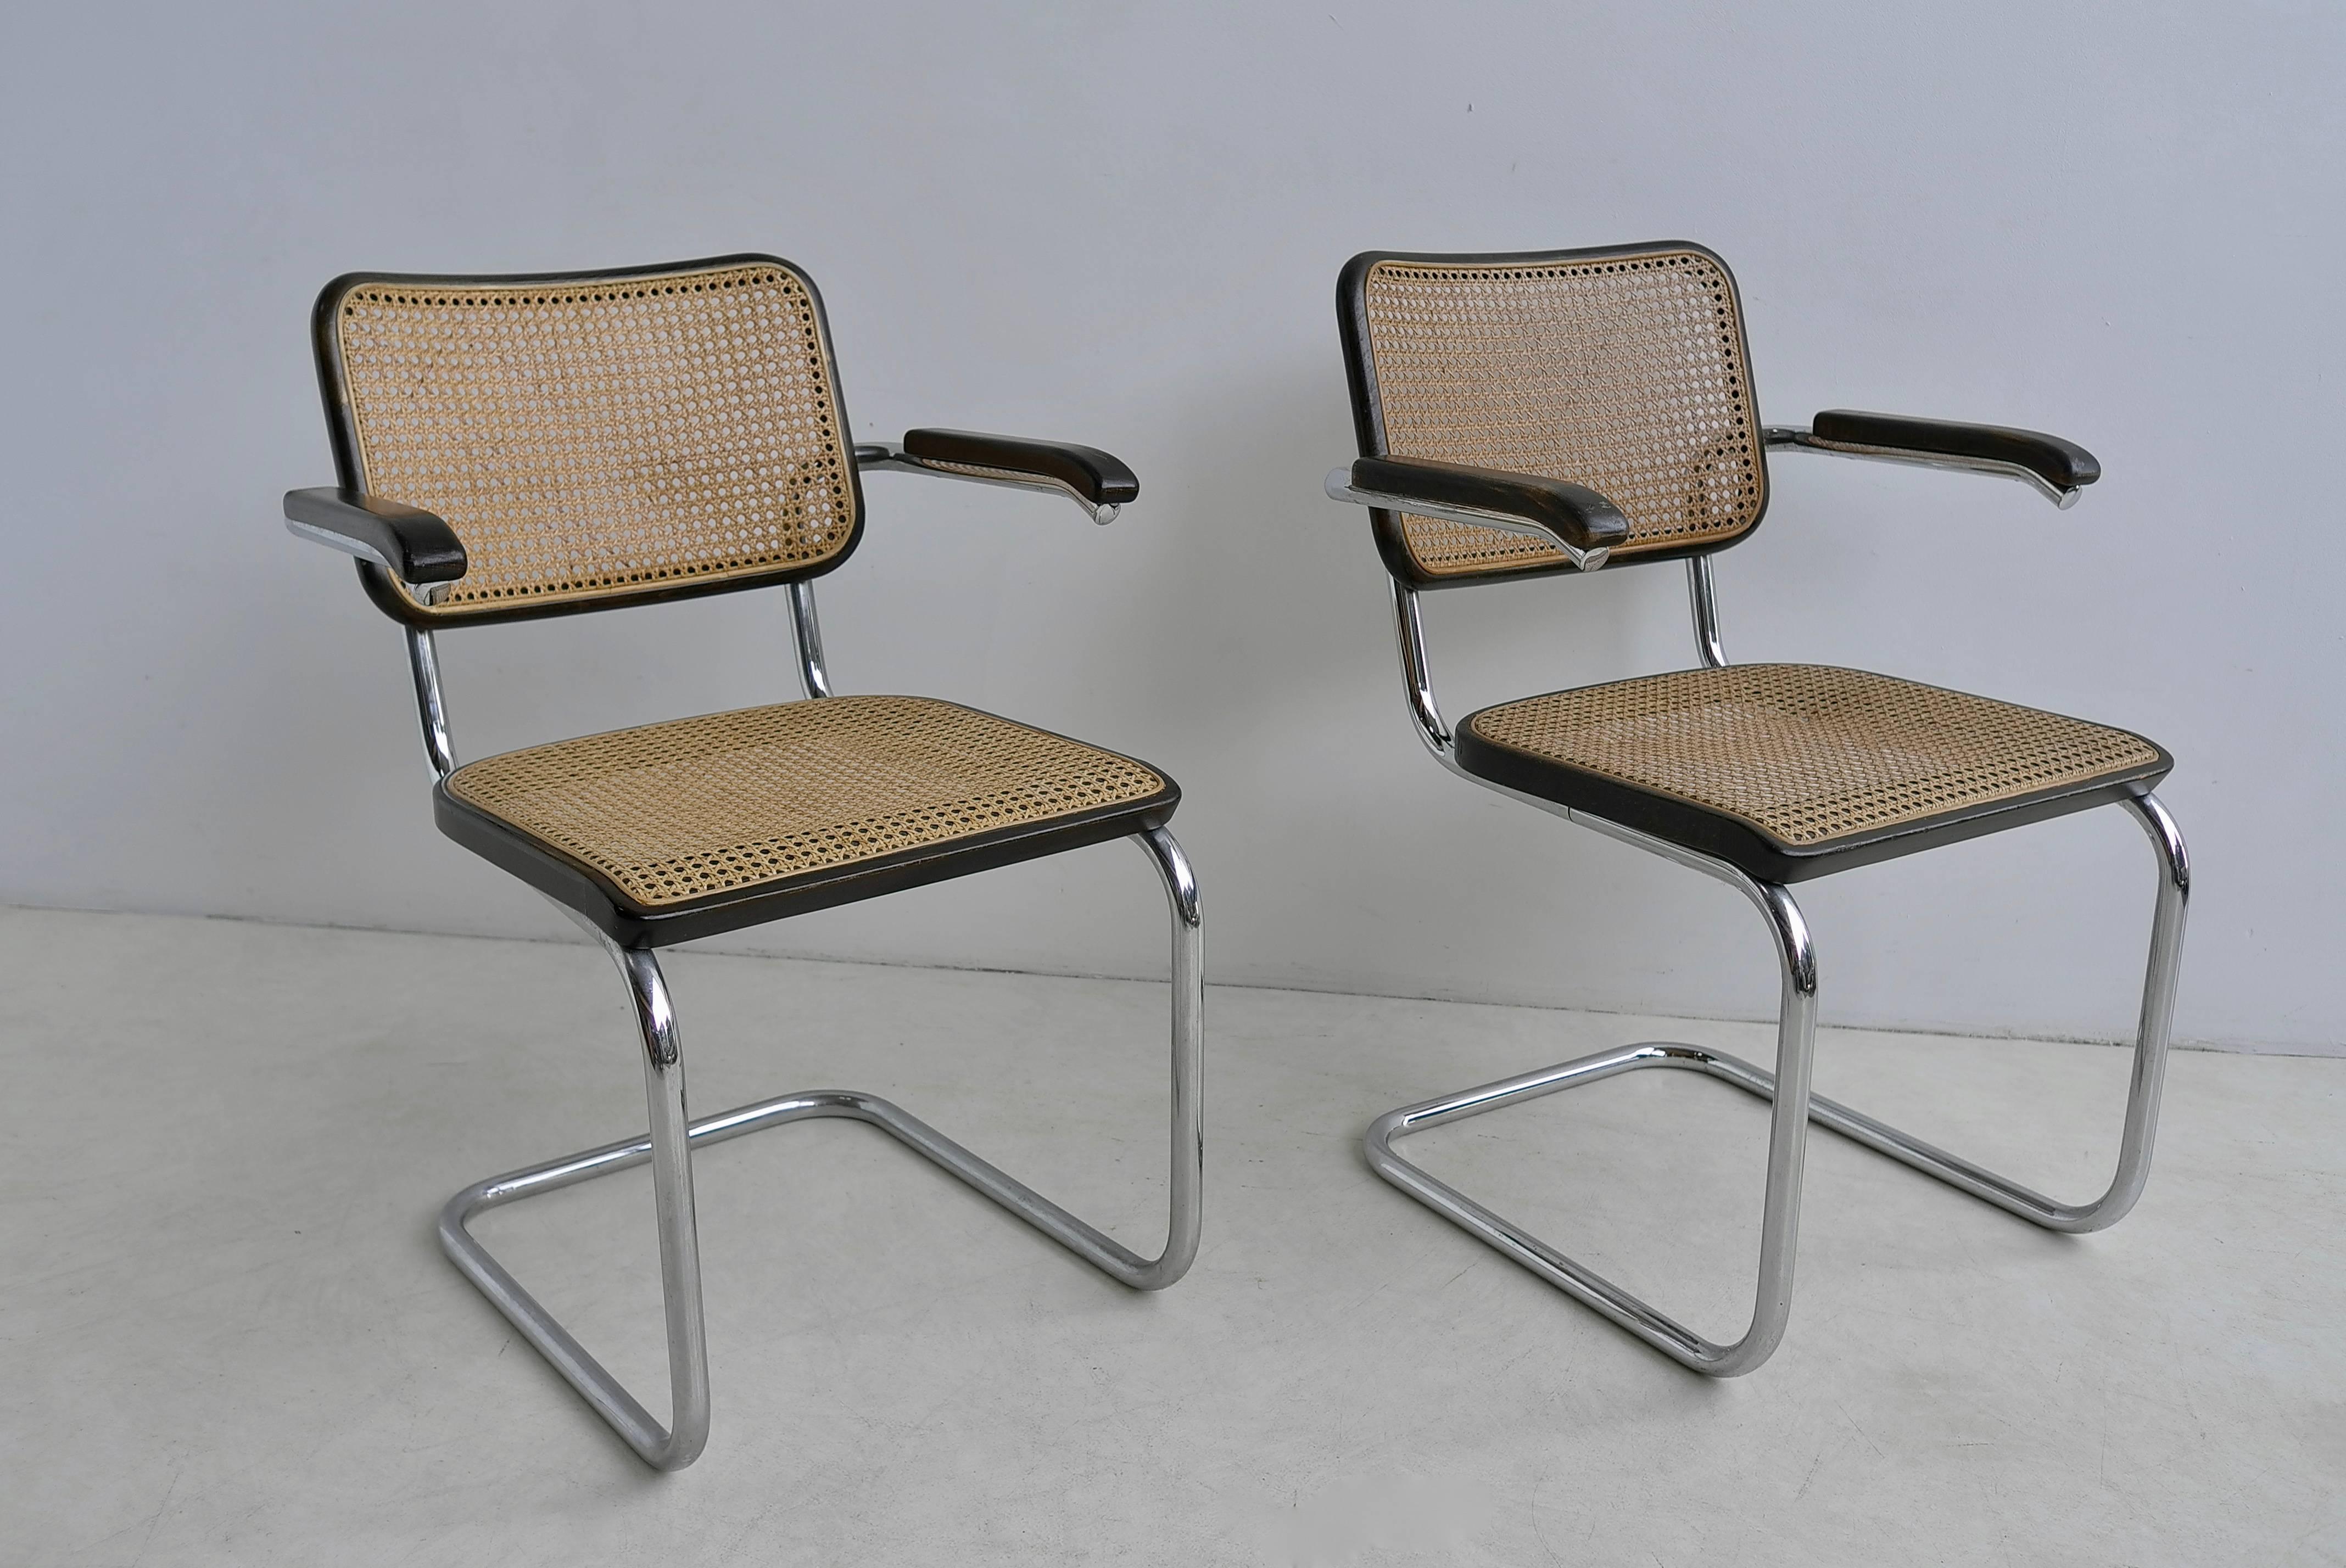 Pair of Marcel Breuer S64 chairs by Thonet.